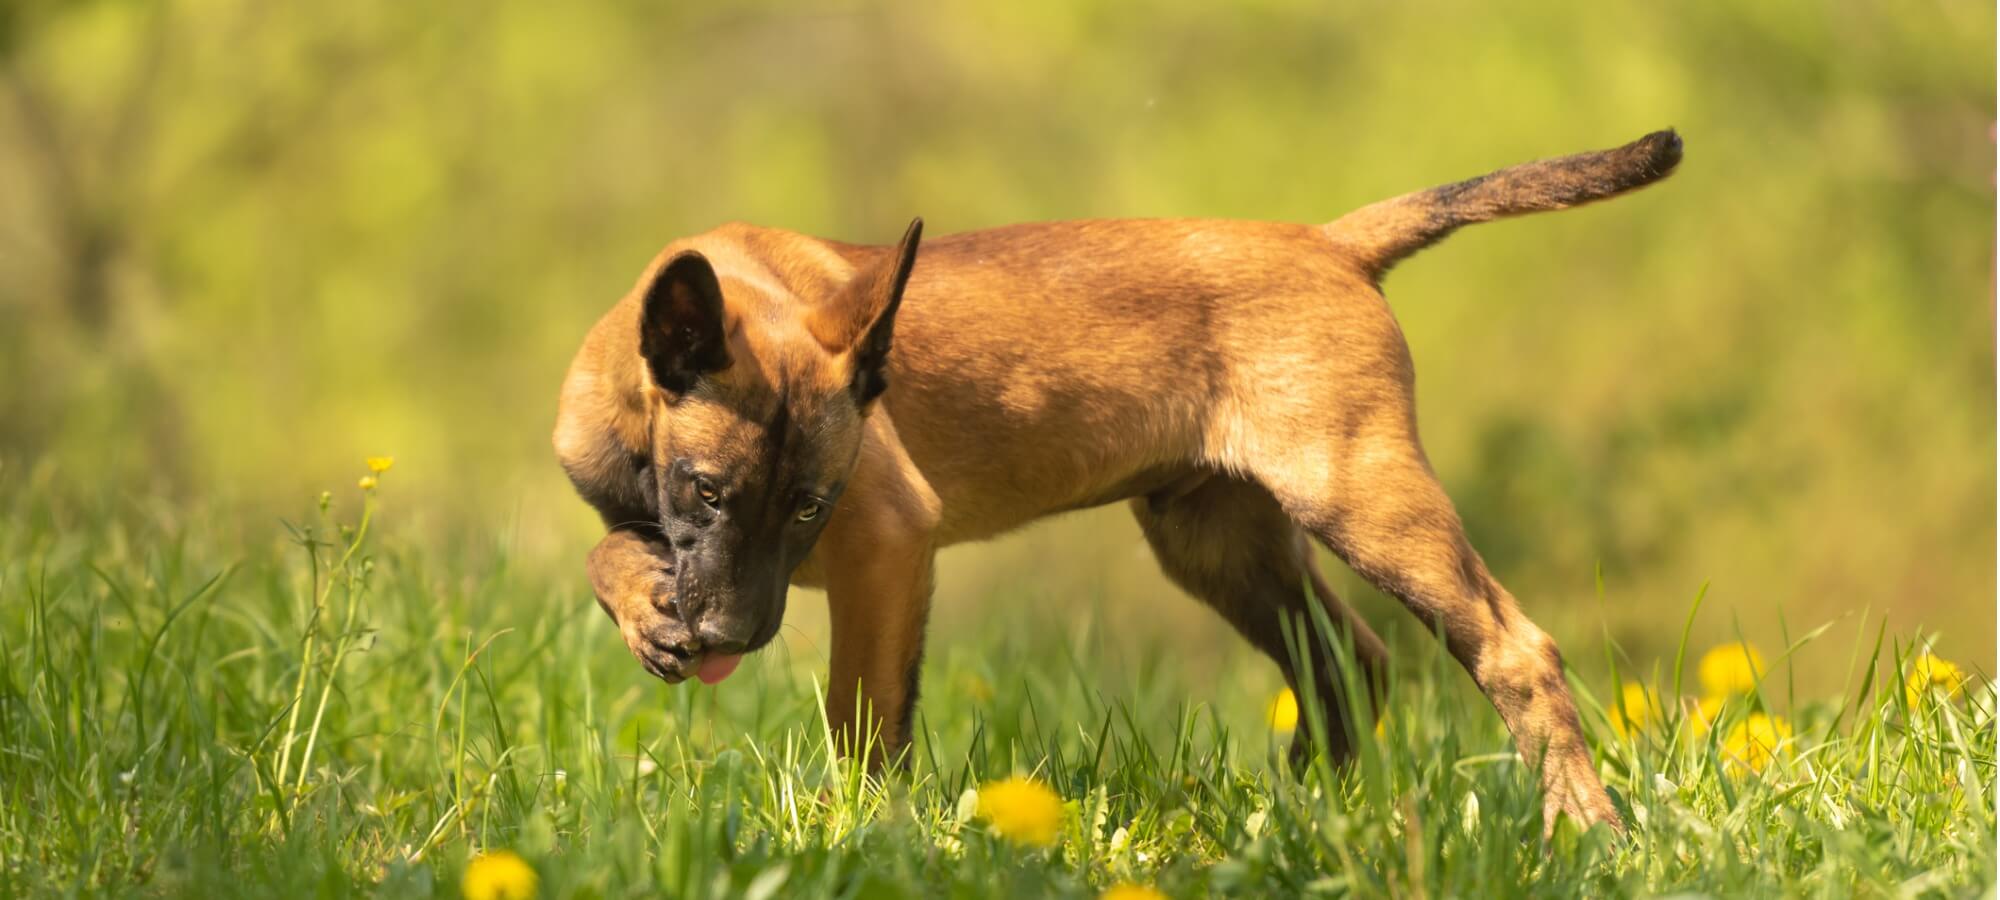 brown dog standing in grass, licking his paw